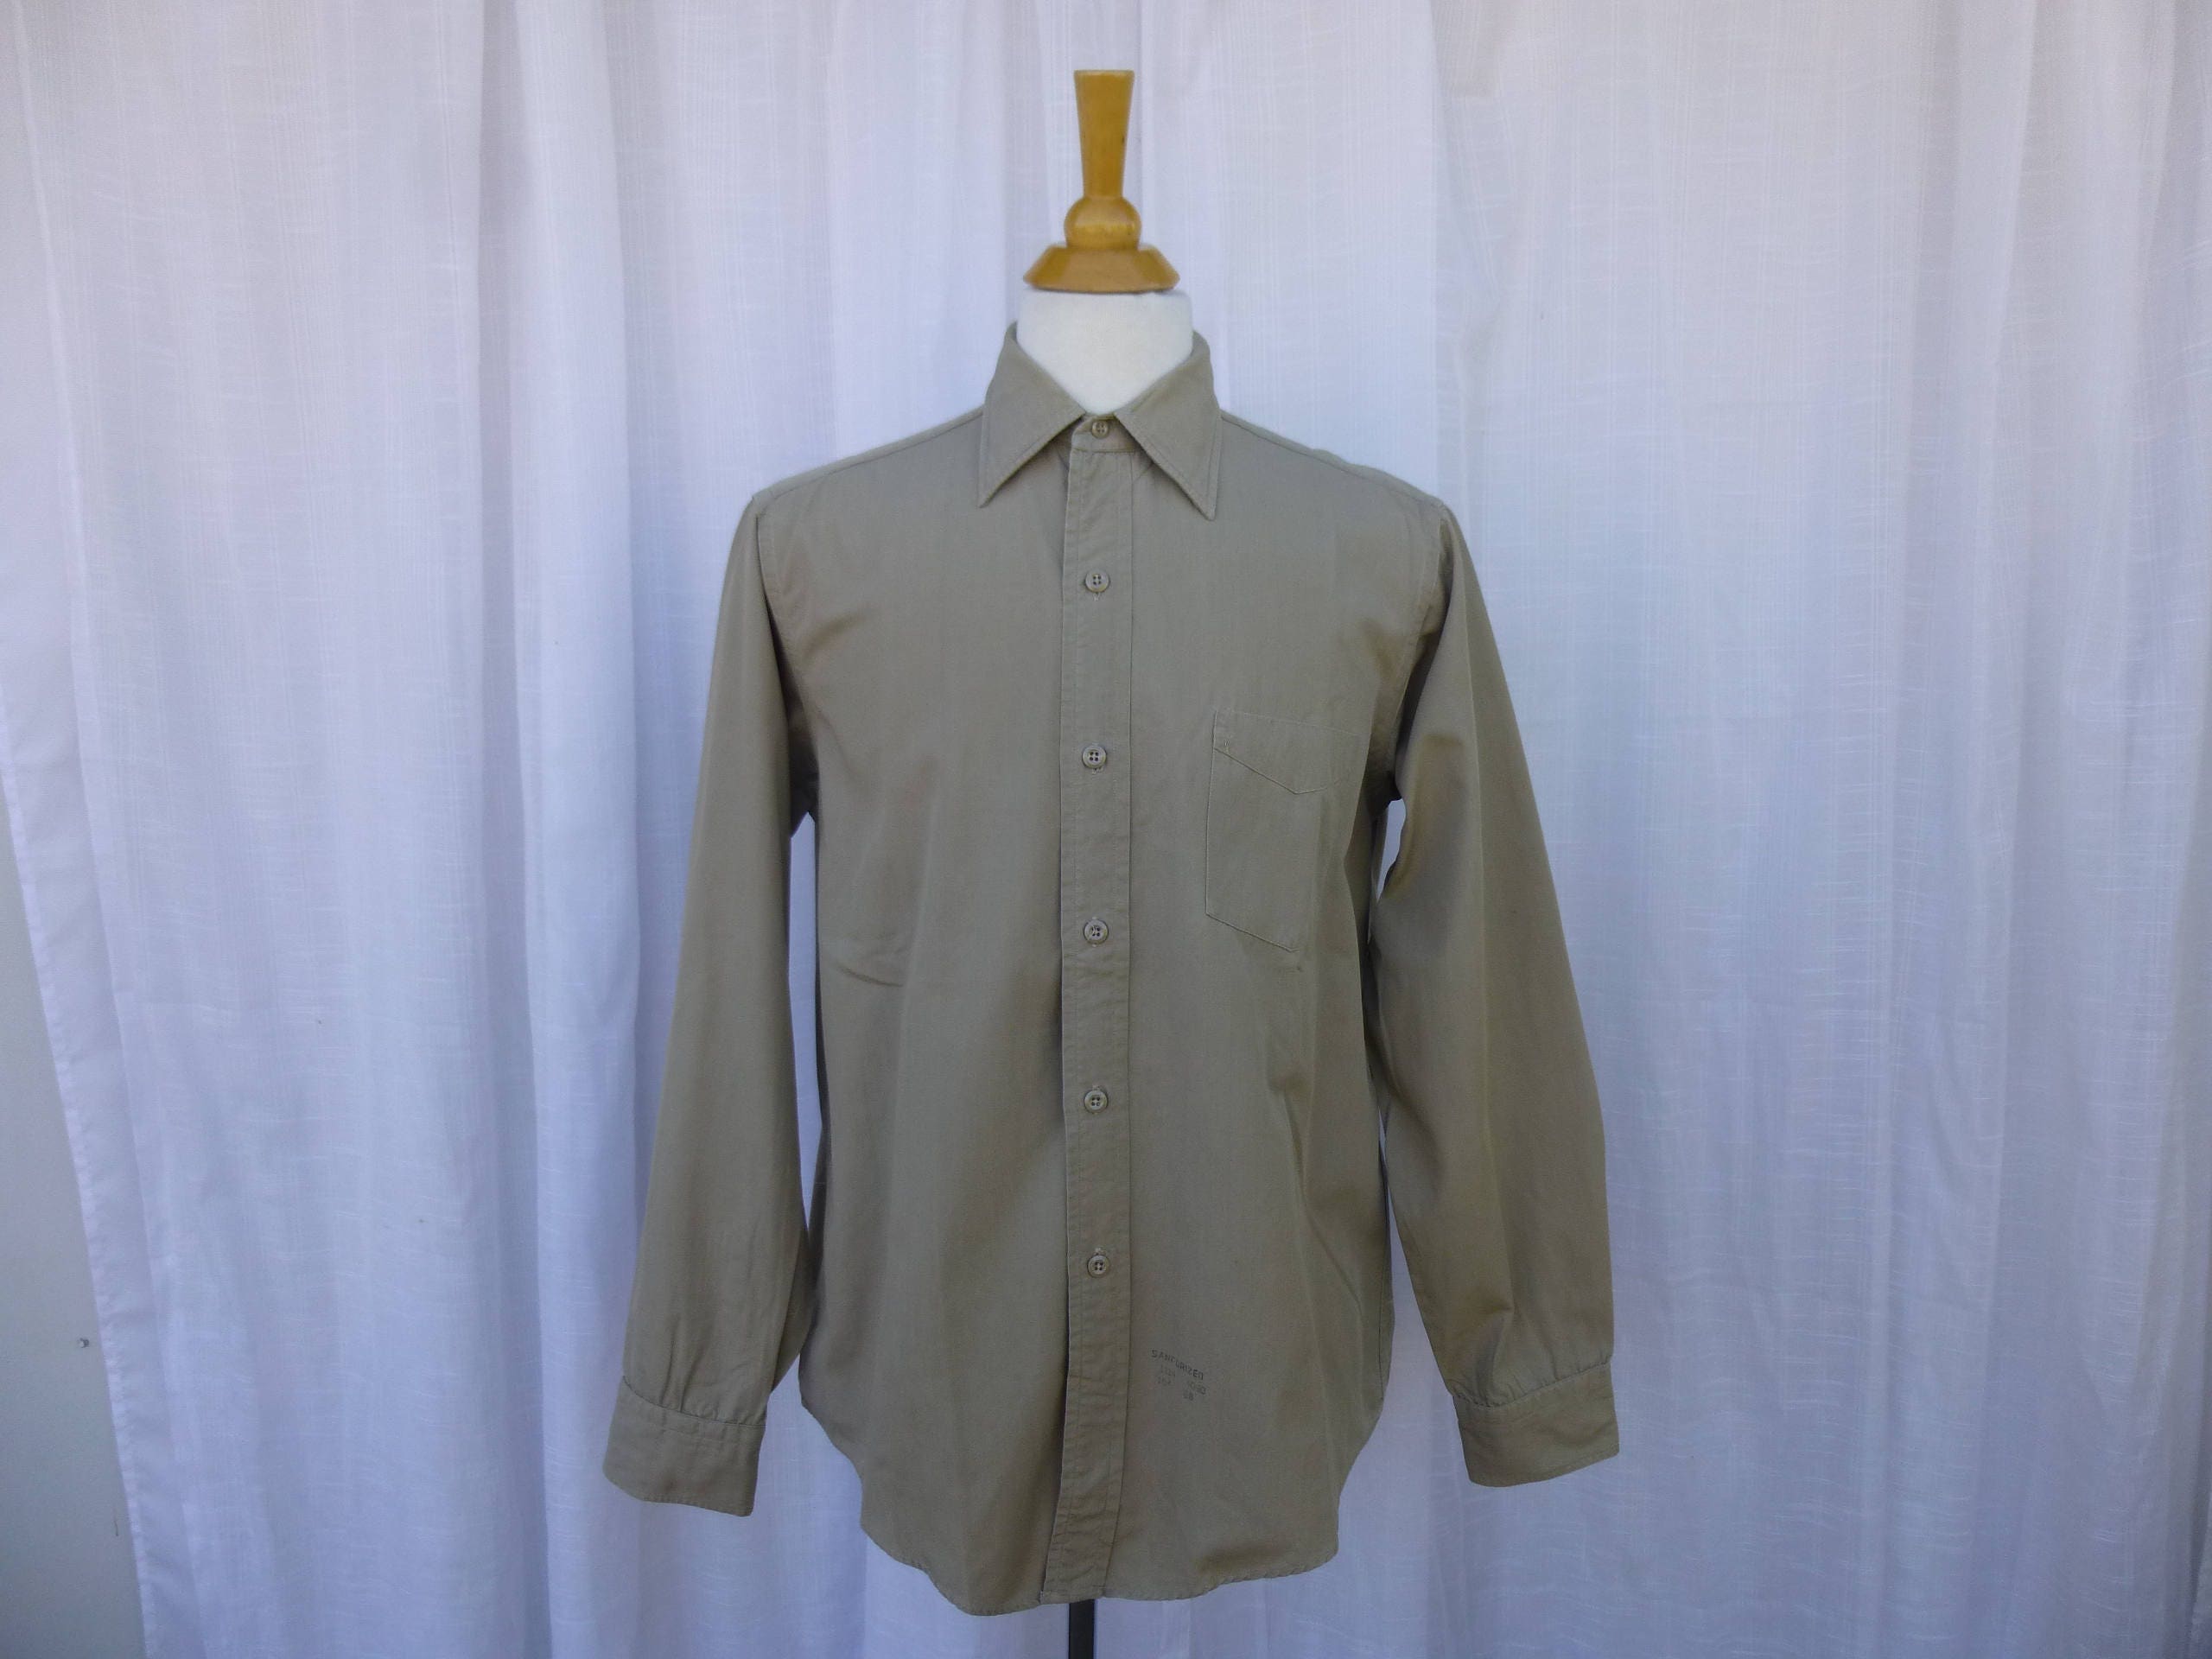 Vintage 60s Flying Cross Military Cotton Shirt M Beige Taupe | Etsy